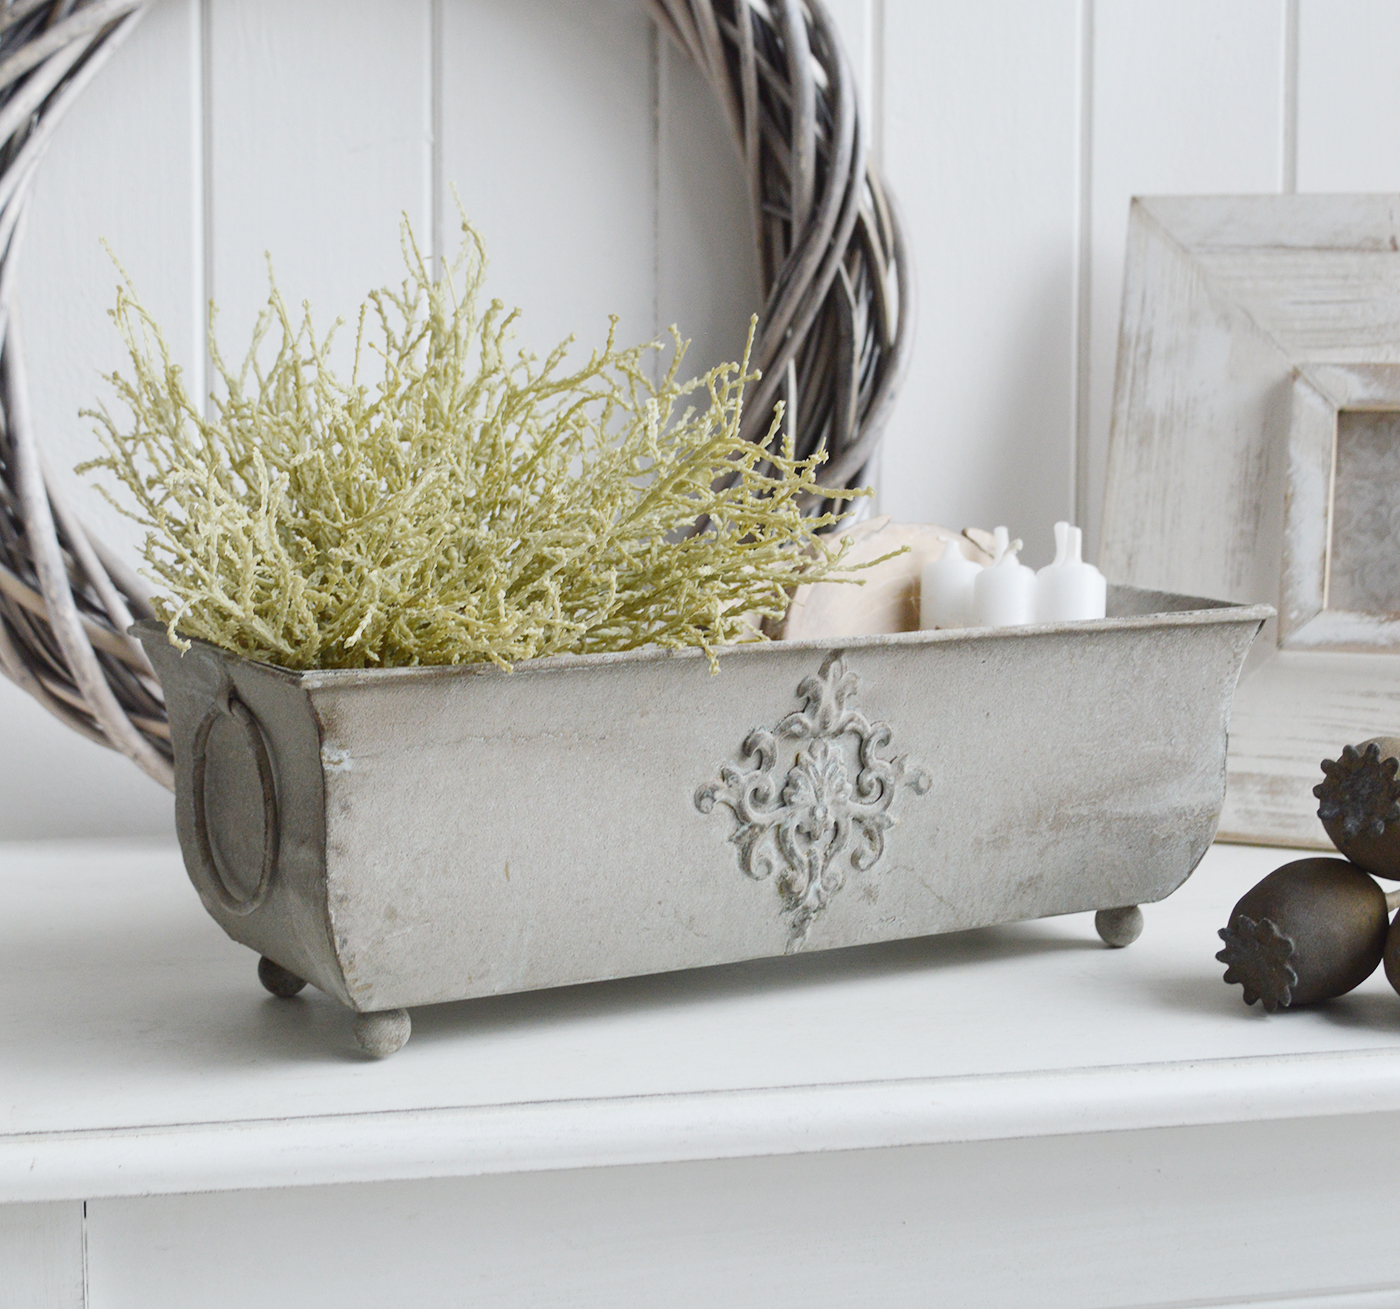 White Furniture and accessories for the home. Farmington Metal Planter - New England Shelf Styling for New England, farmhouse Country and coastal home interior decor